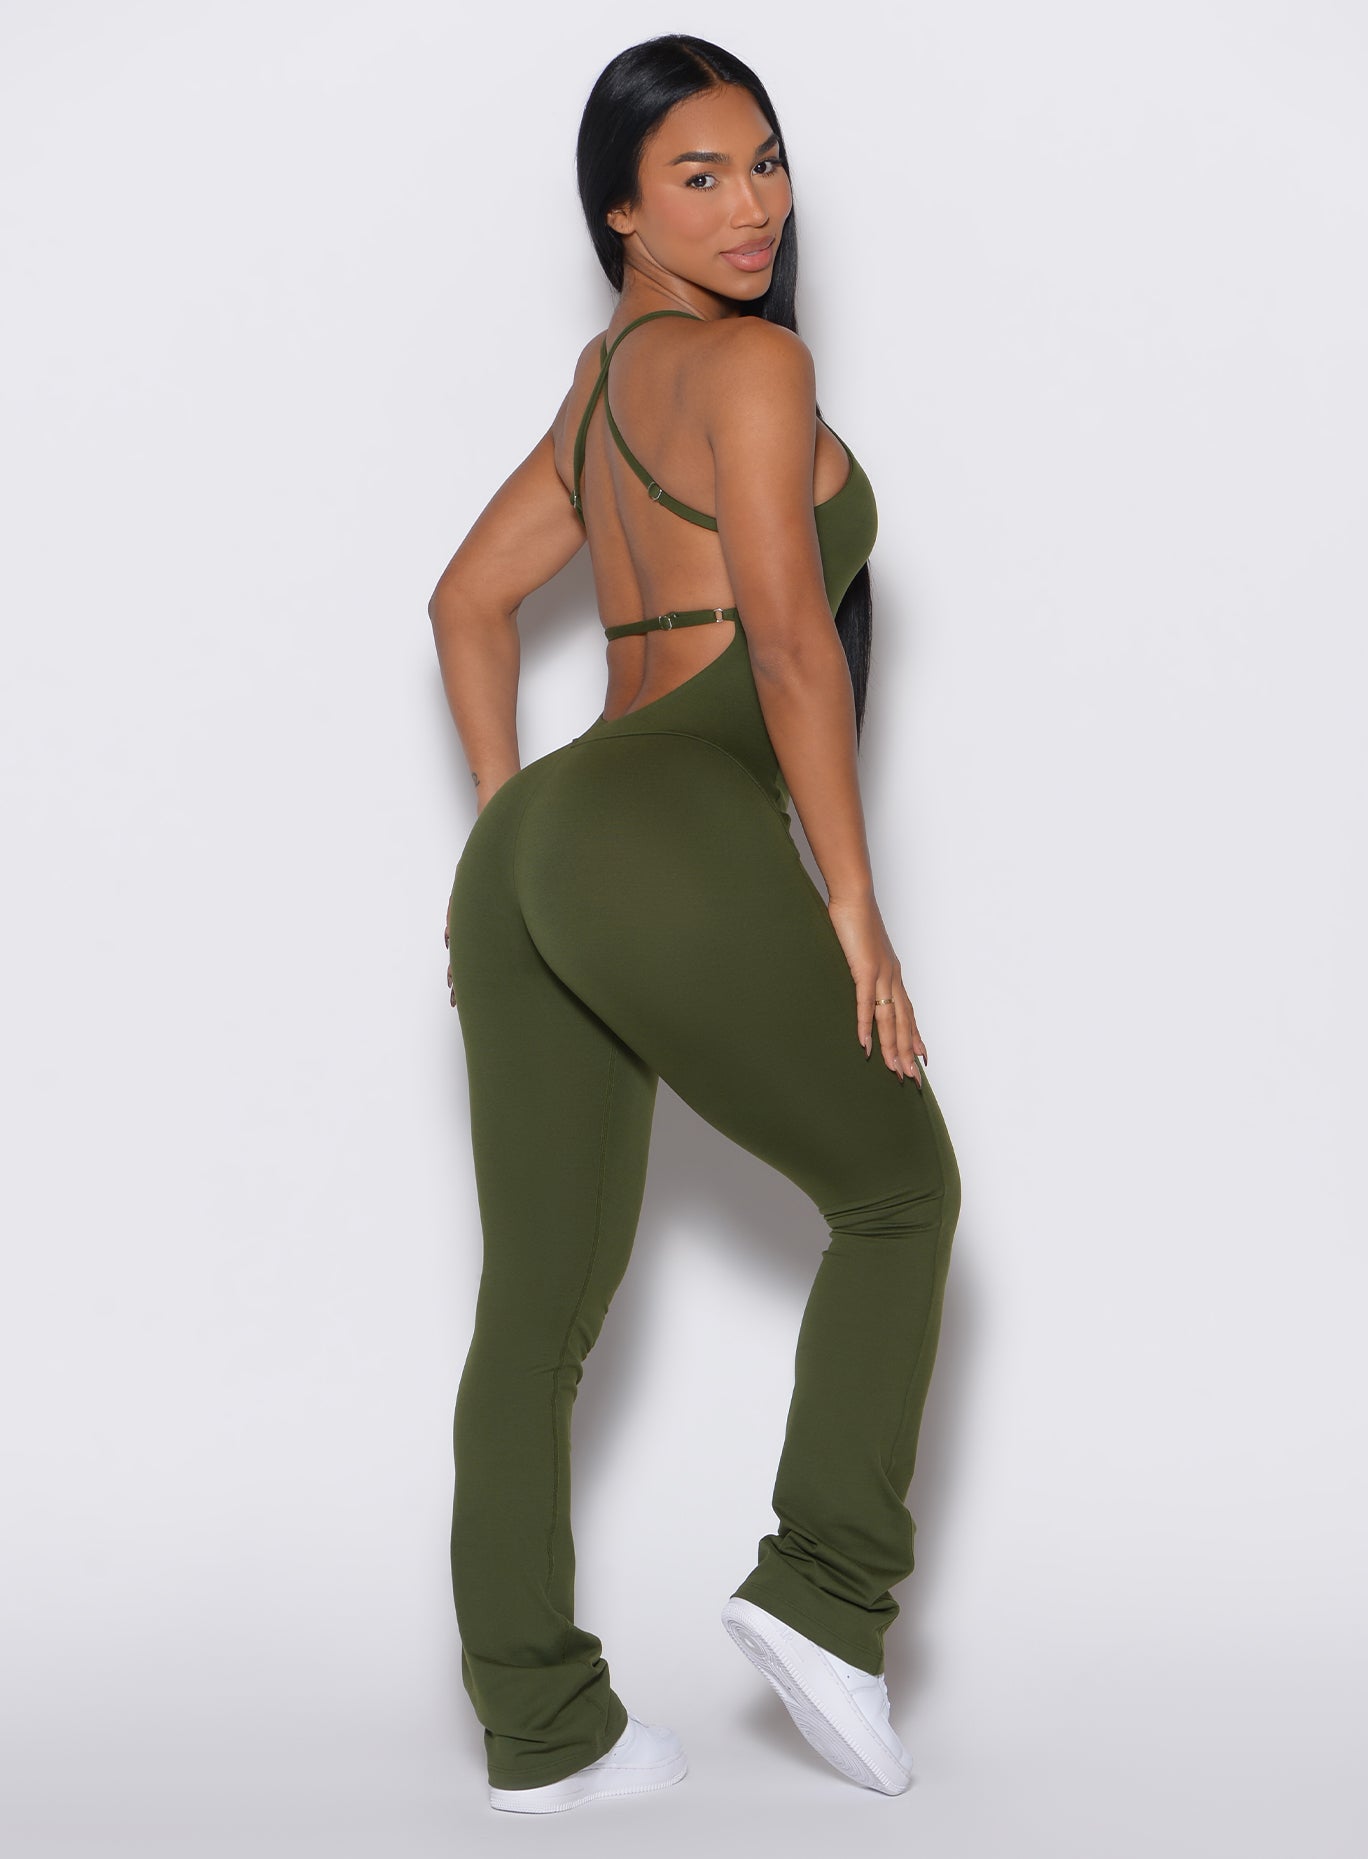 Right side profile view of a model wearing the Bombshell Bunny Bodysuit in Jungle color